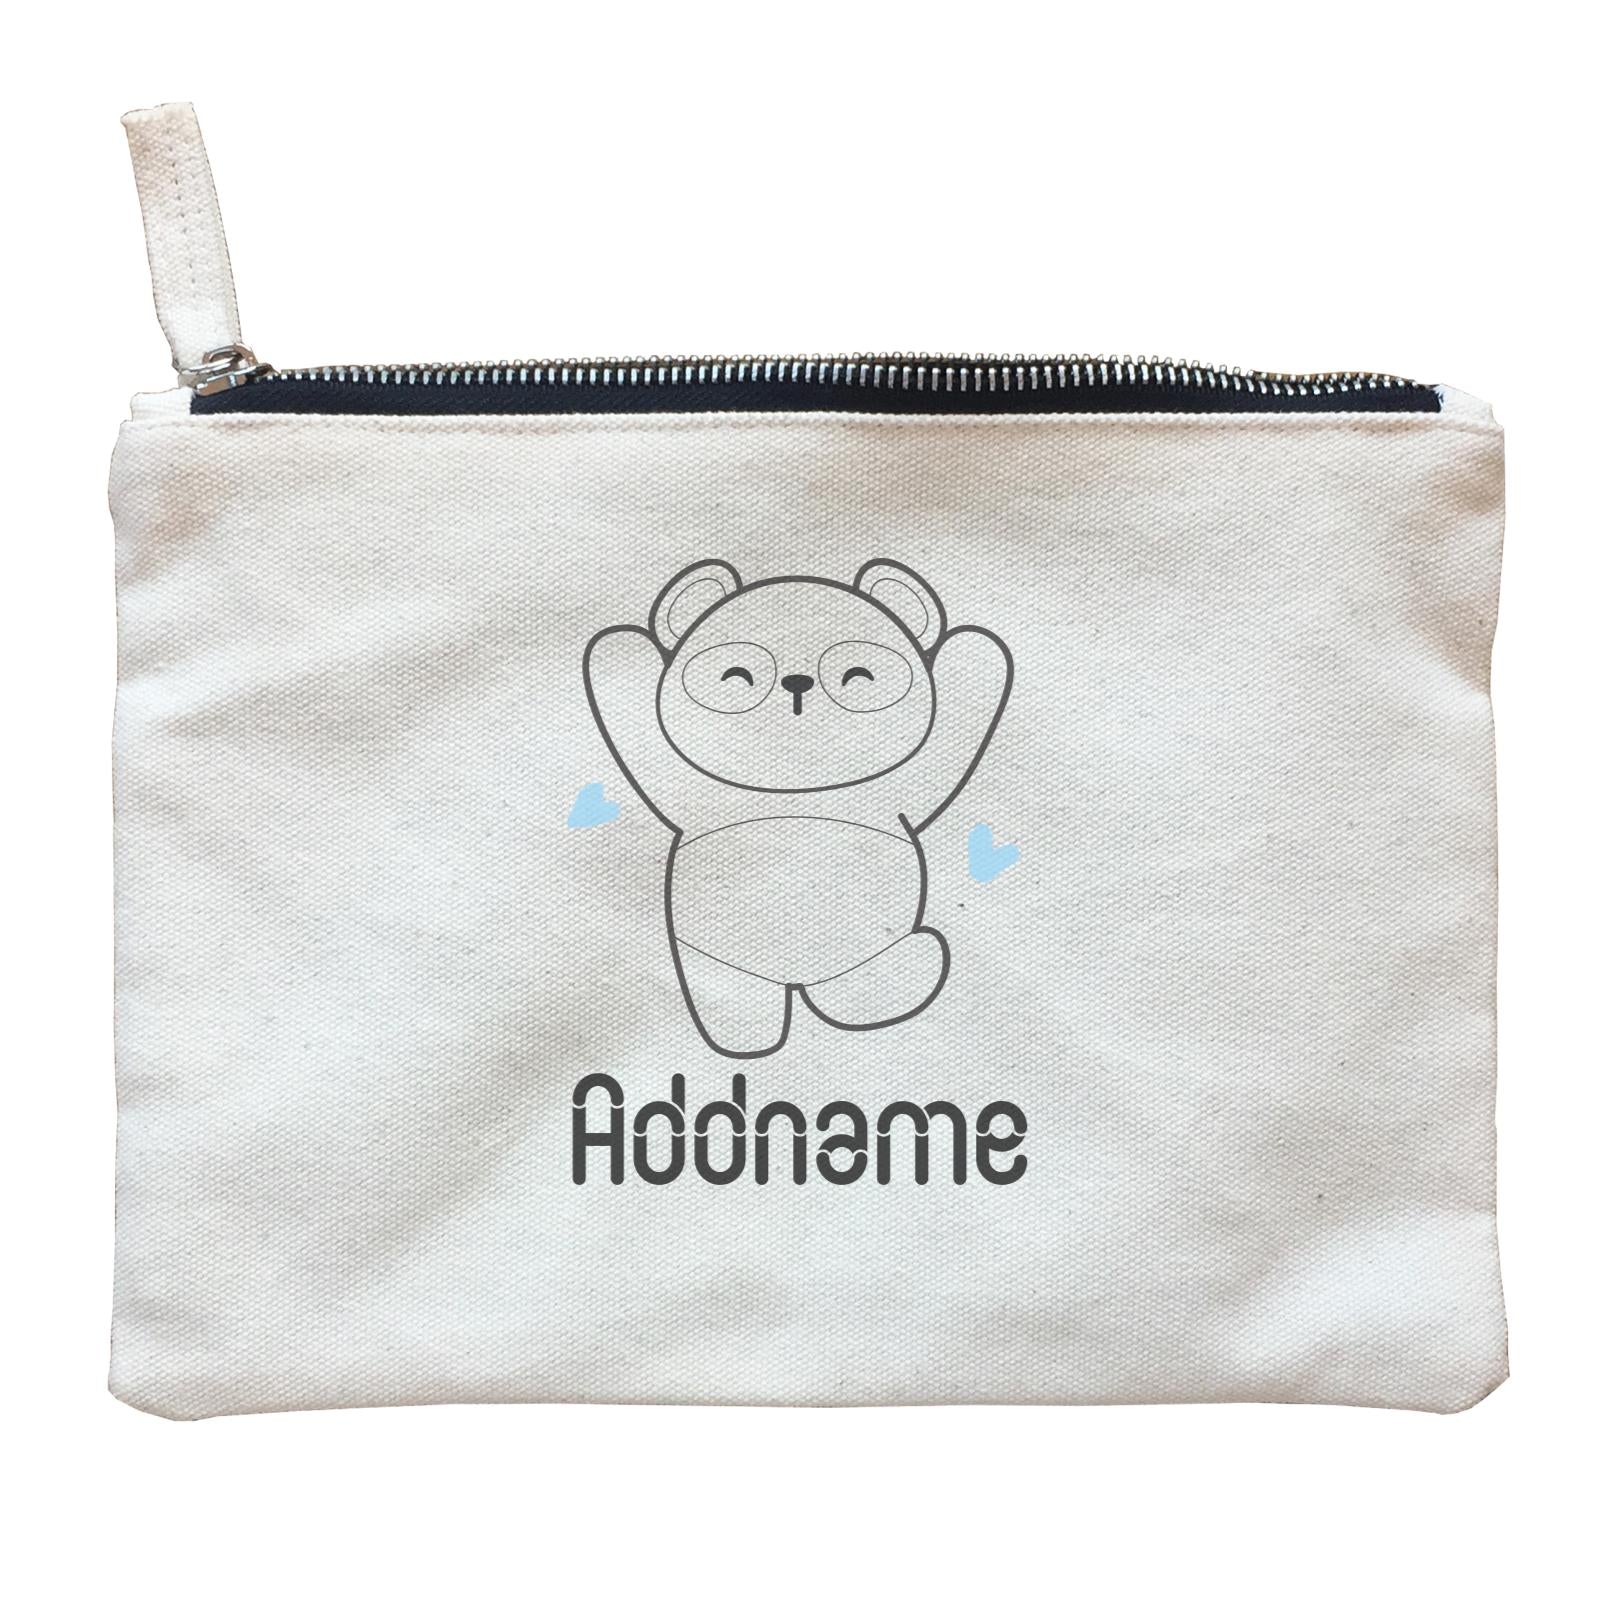 Coloring Outline Cute Hand Drawn Animals Cute Panda Jumps With Joy Addname Zipper Pouch